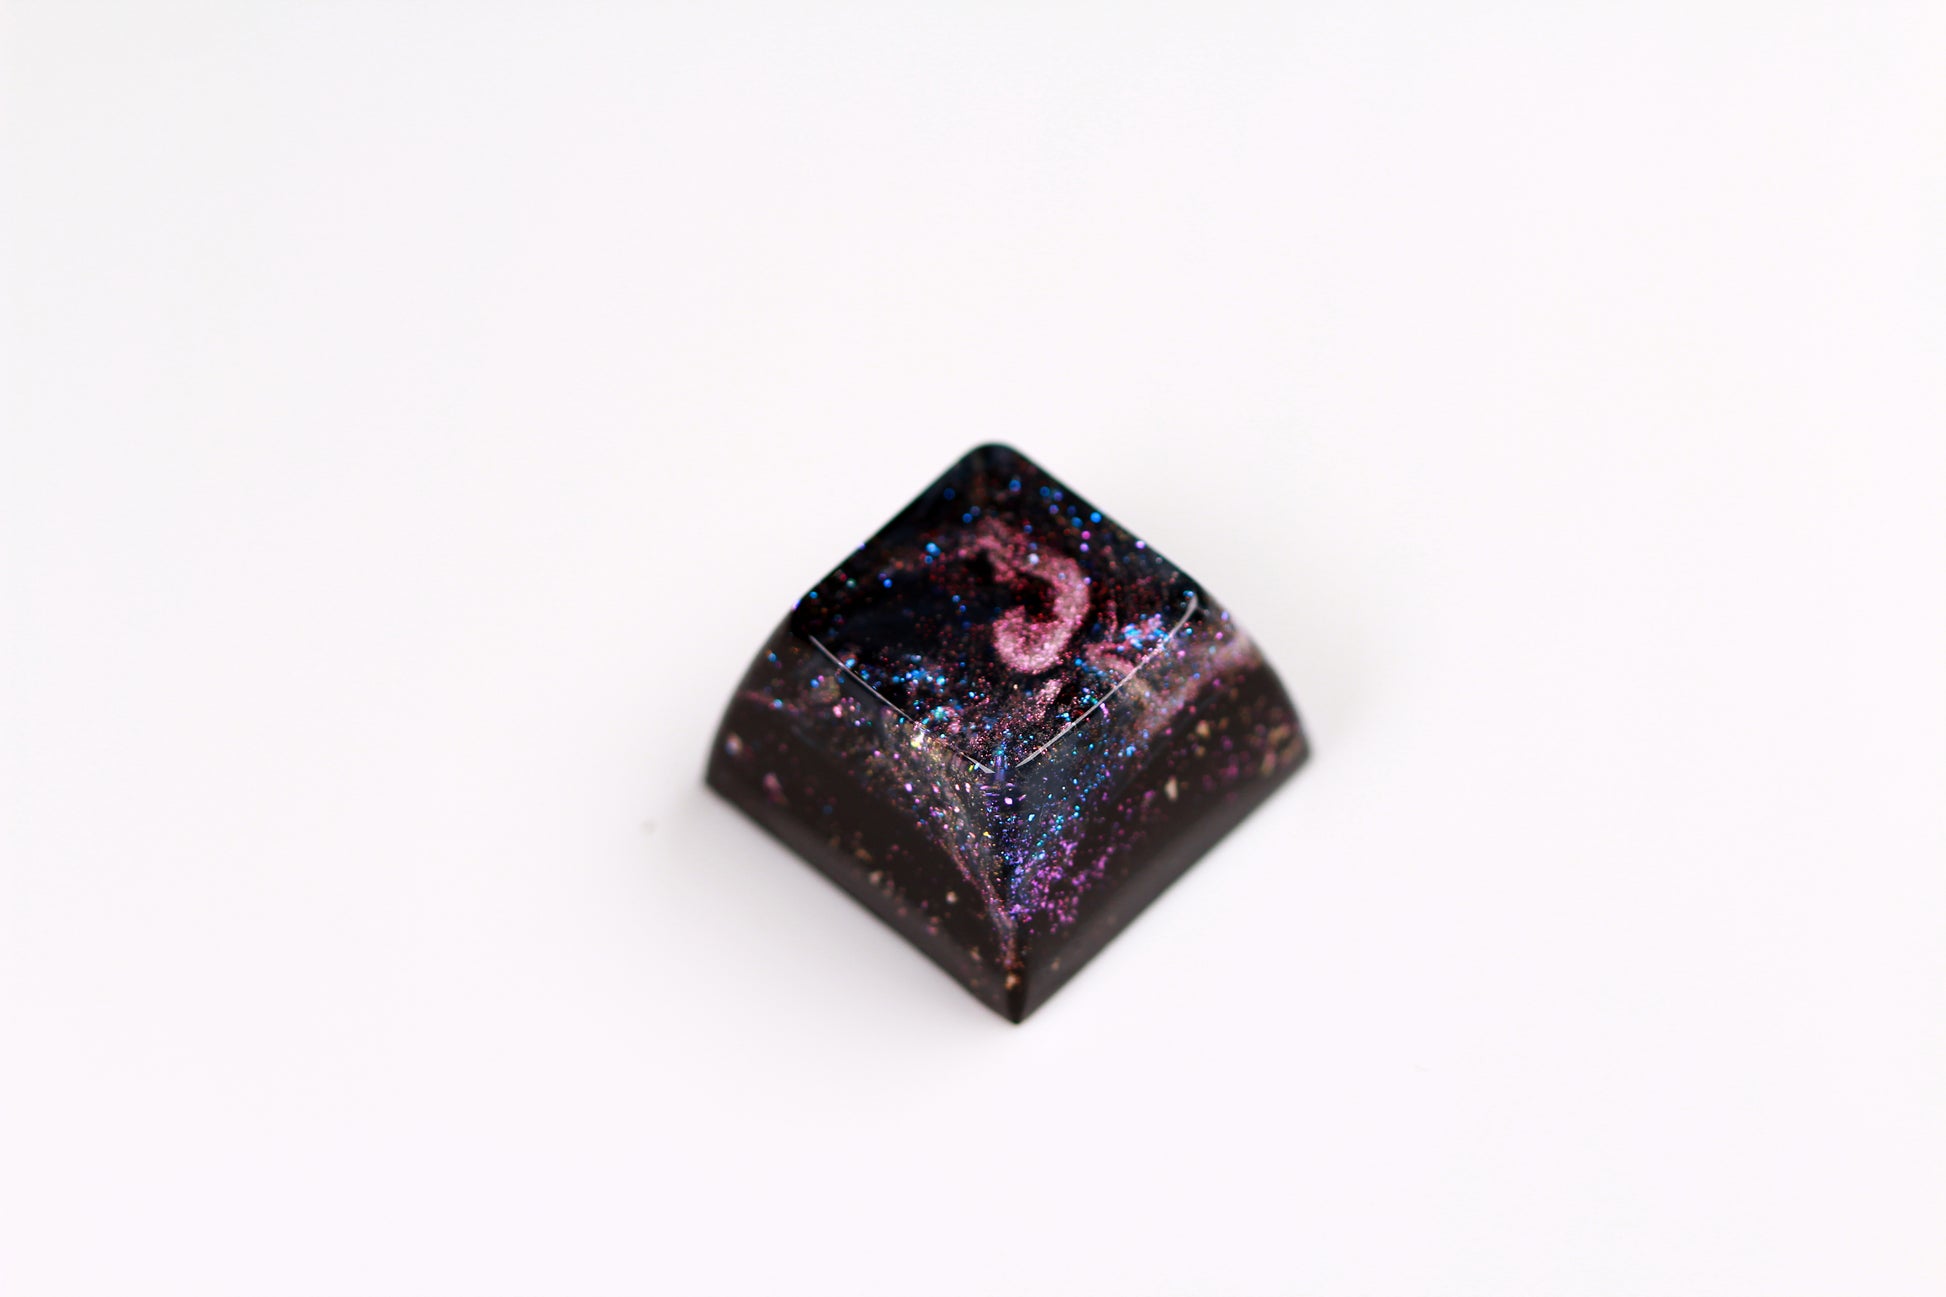 Gimpy SA Row 3 - Deep Field Particle Stream 1 - PrimeCaps Keycap - Blank and Sculpted Artisan Keycaps for cherry MX mechanical keyboards 